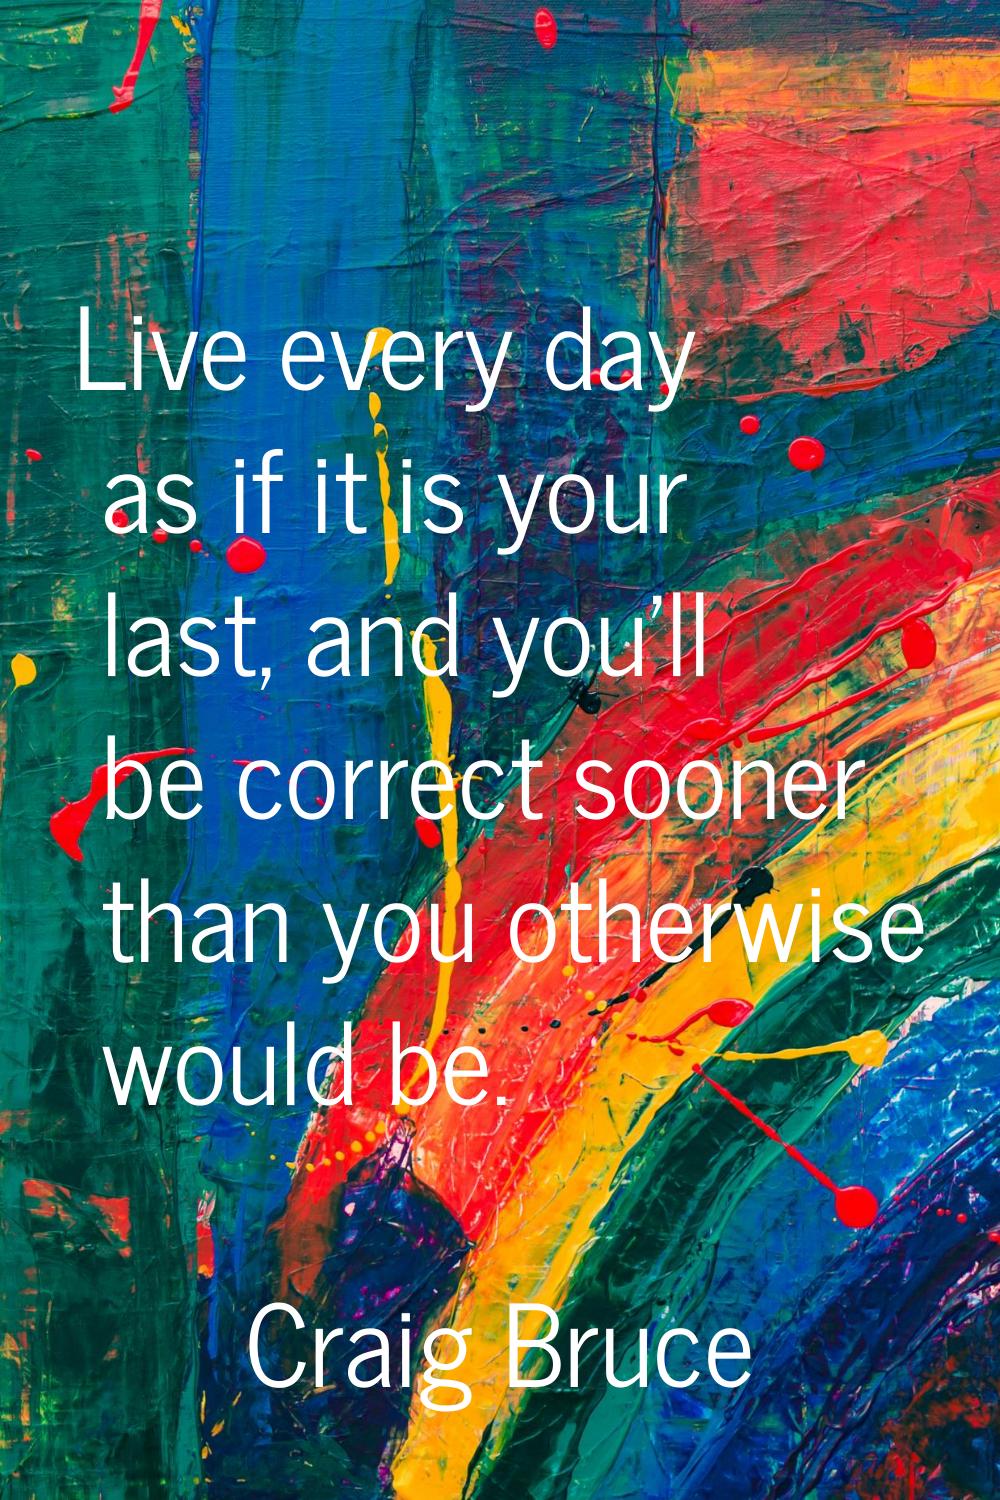 Live every day as if it is your last, and you'll be correct sooner than you otherwise would be.